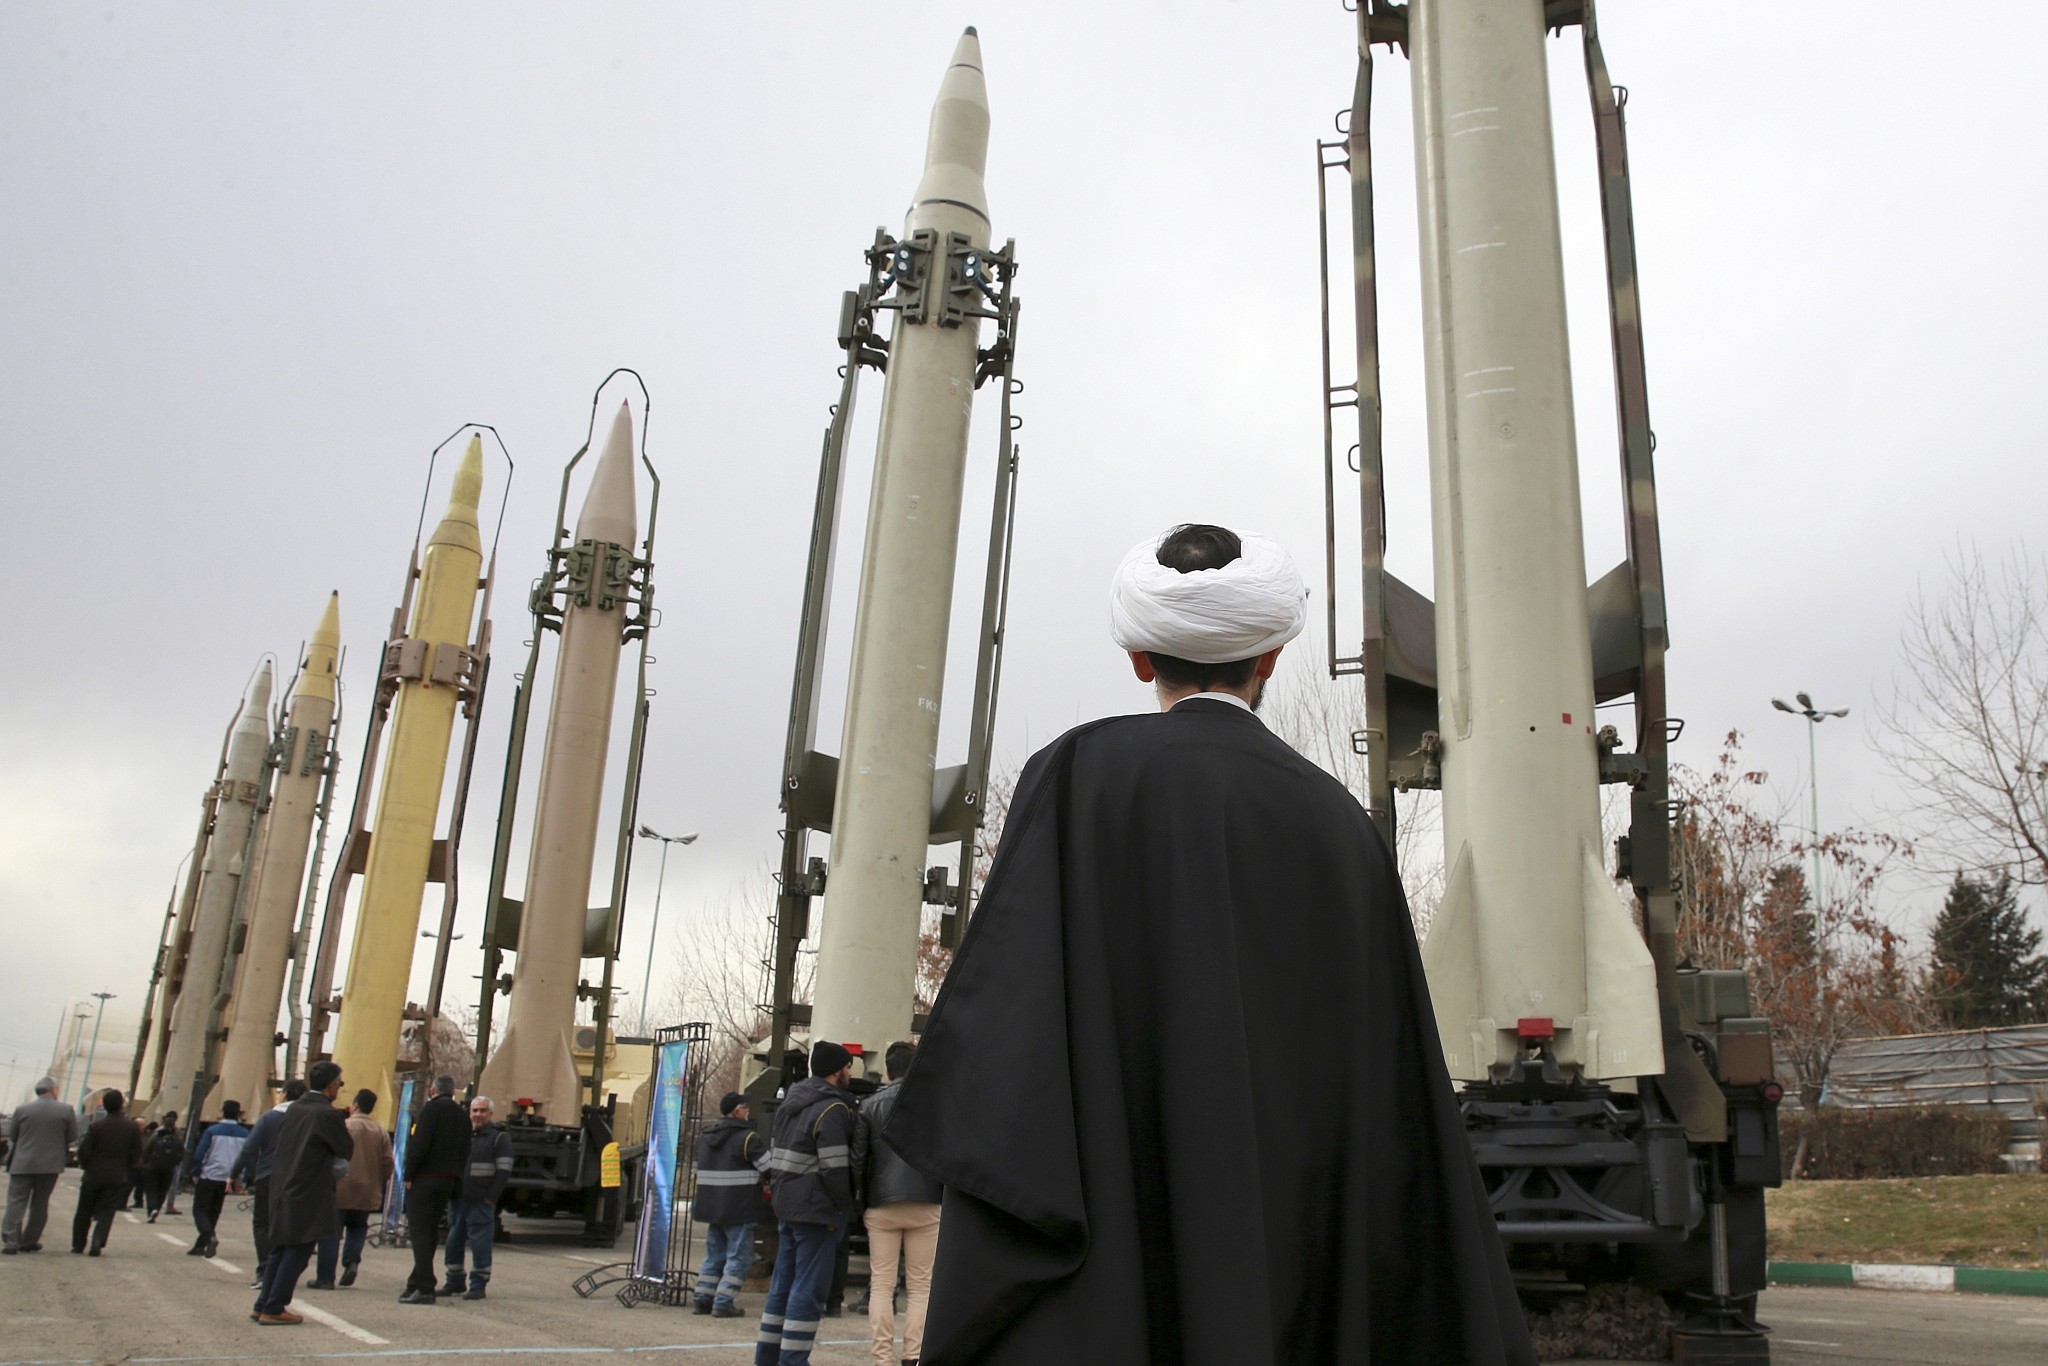 Iran unveils new missiles despite nuclear talks reaching final stage